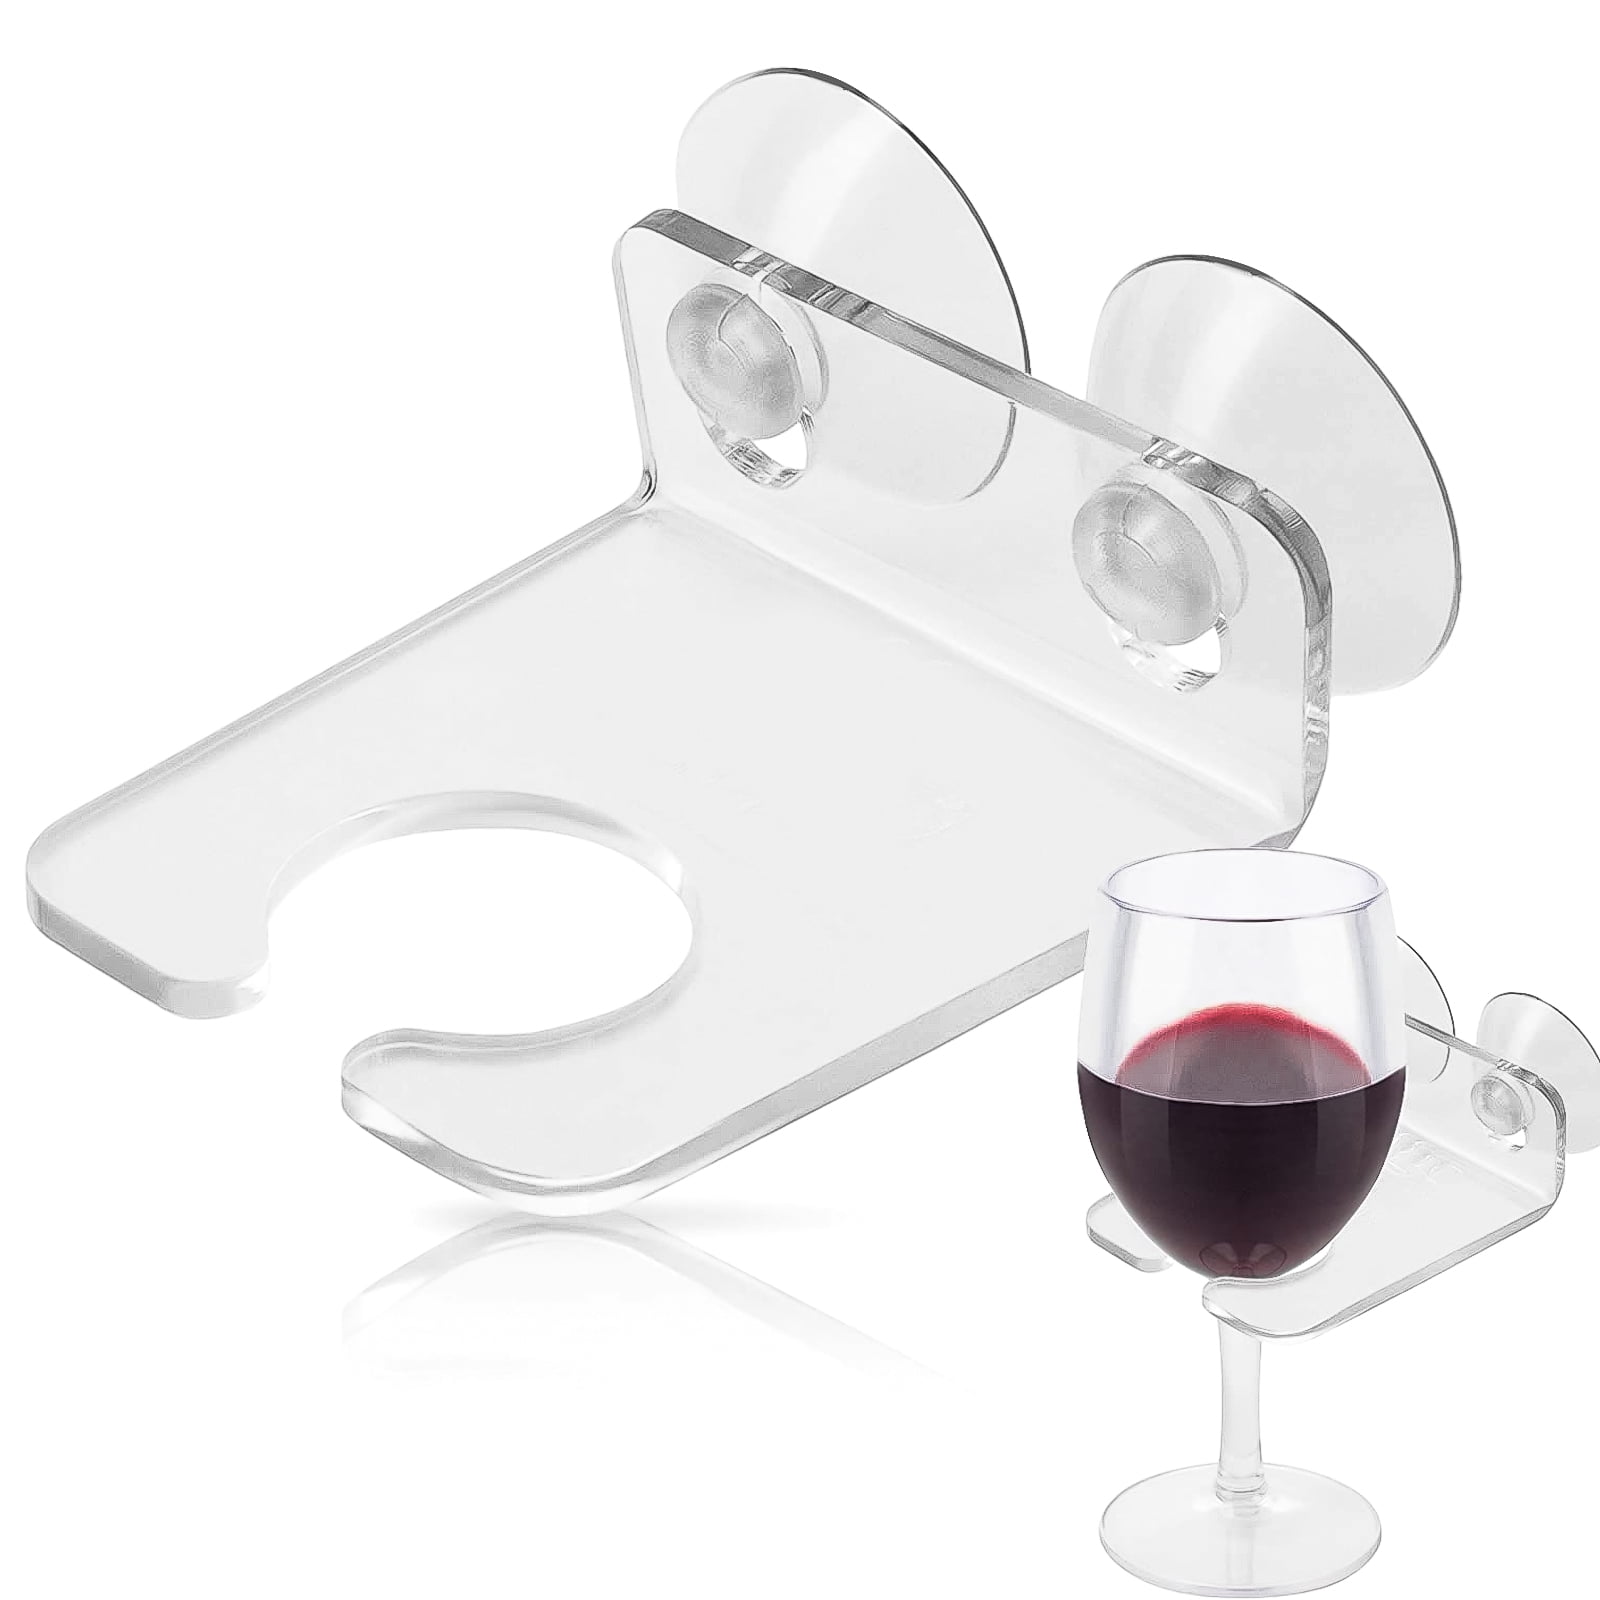 Bathtub Wine Glass Cupholder, EEEkit Clear Beer Wine Cup Holder with  Suction Cups, Bath Shower Wine Glass Holder, Portable Drink Holder, Wine  Gifts